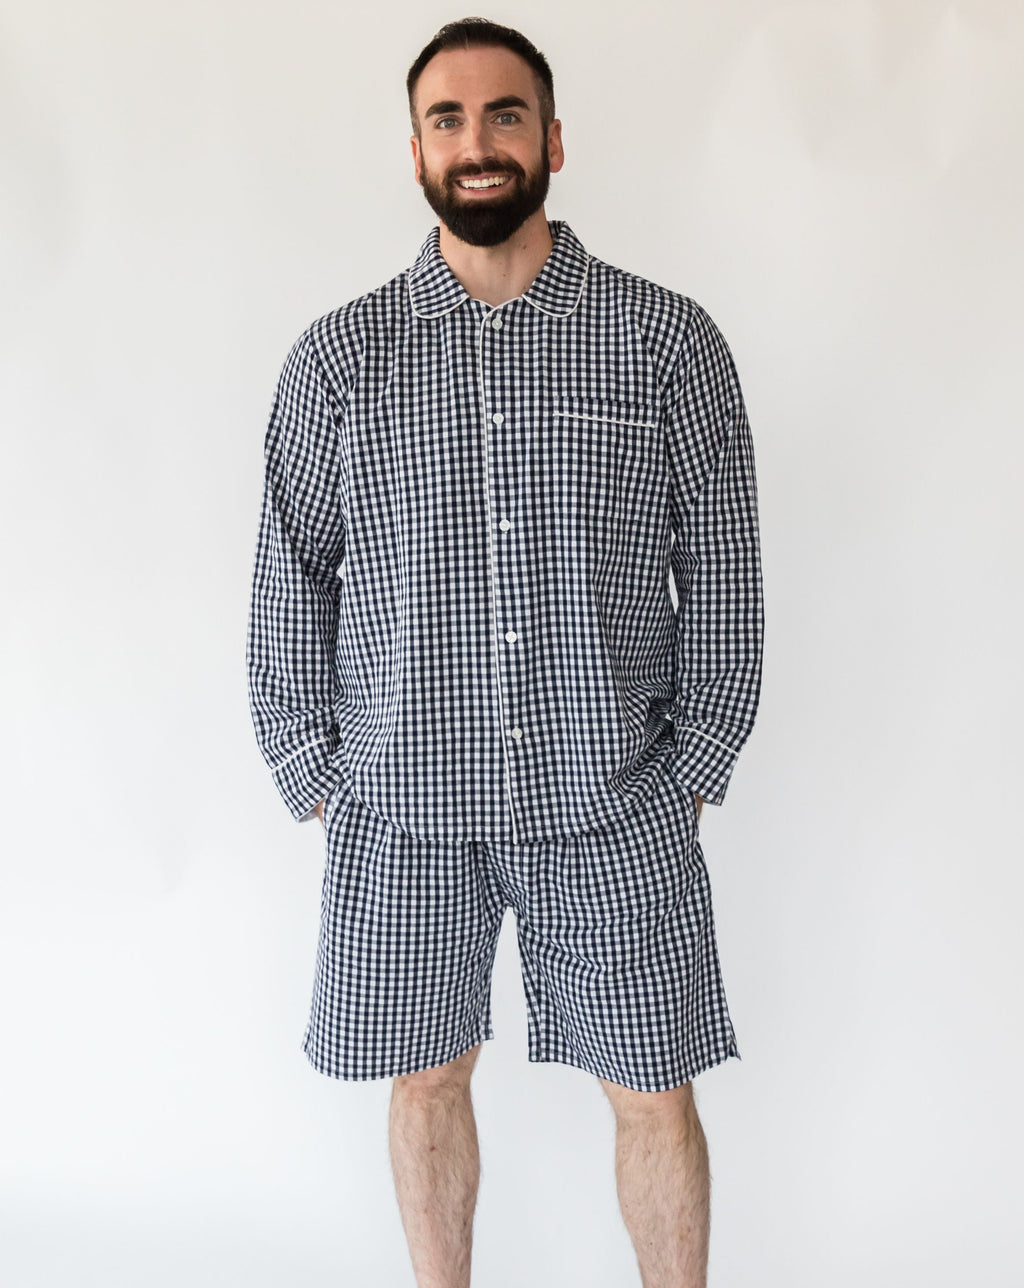 Men's Holiday Navy Gingham shorts with shorts - Front